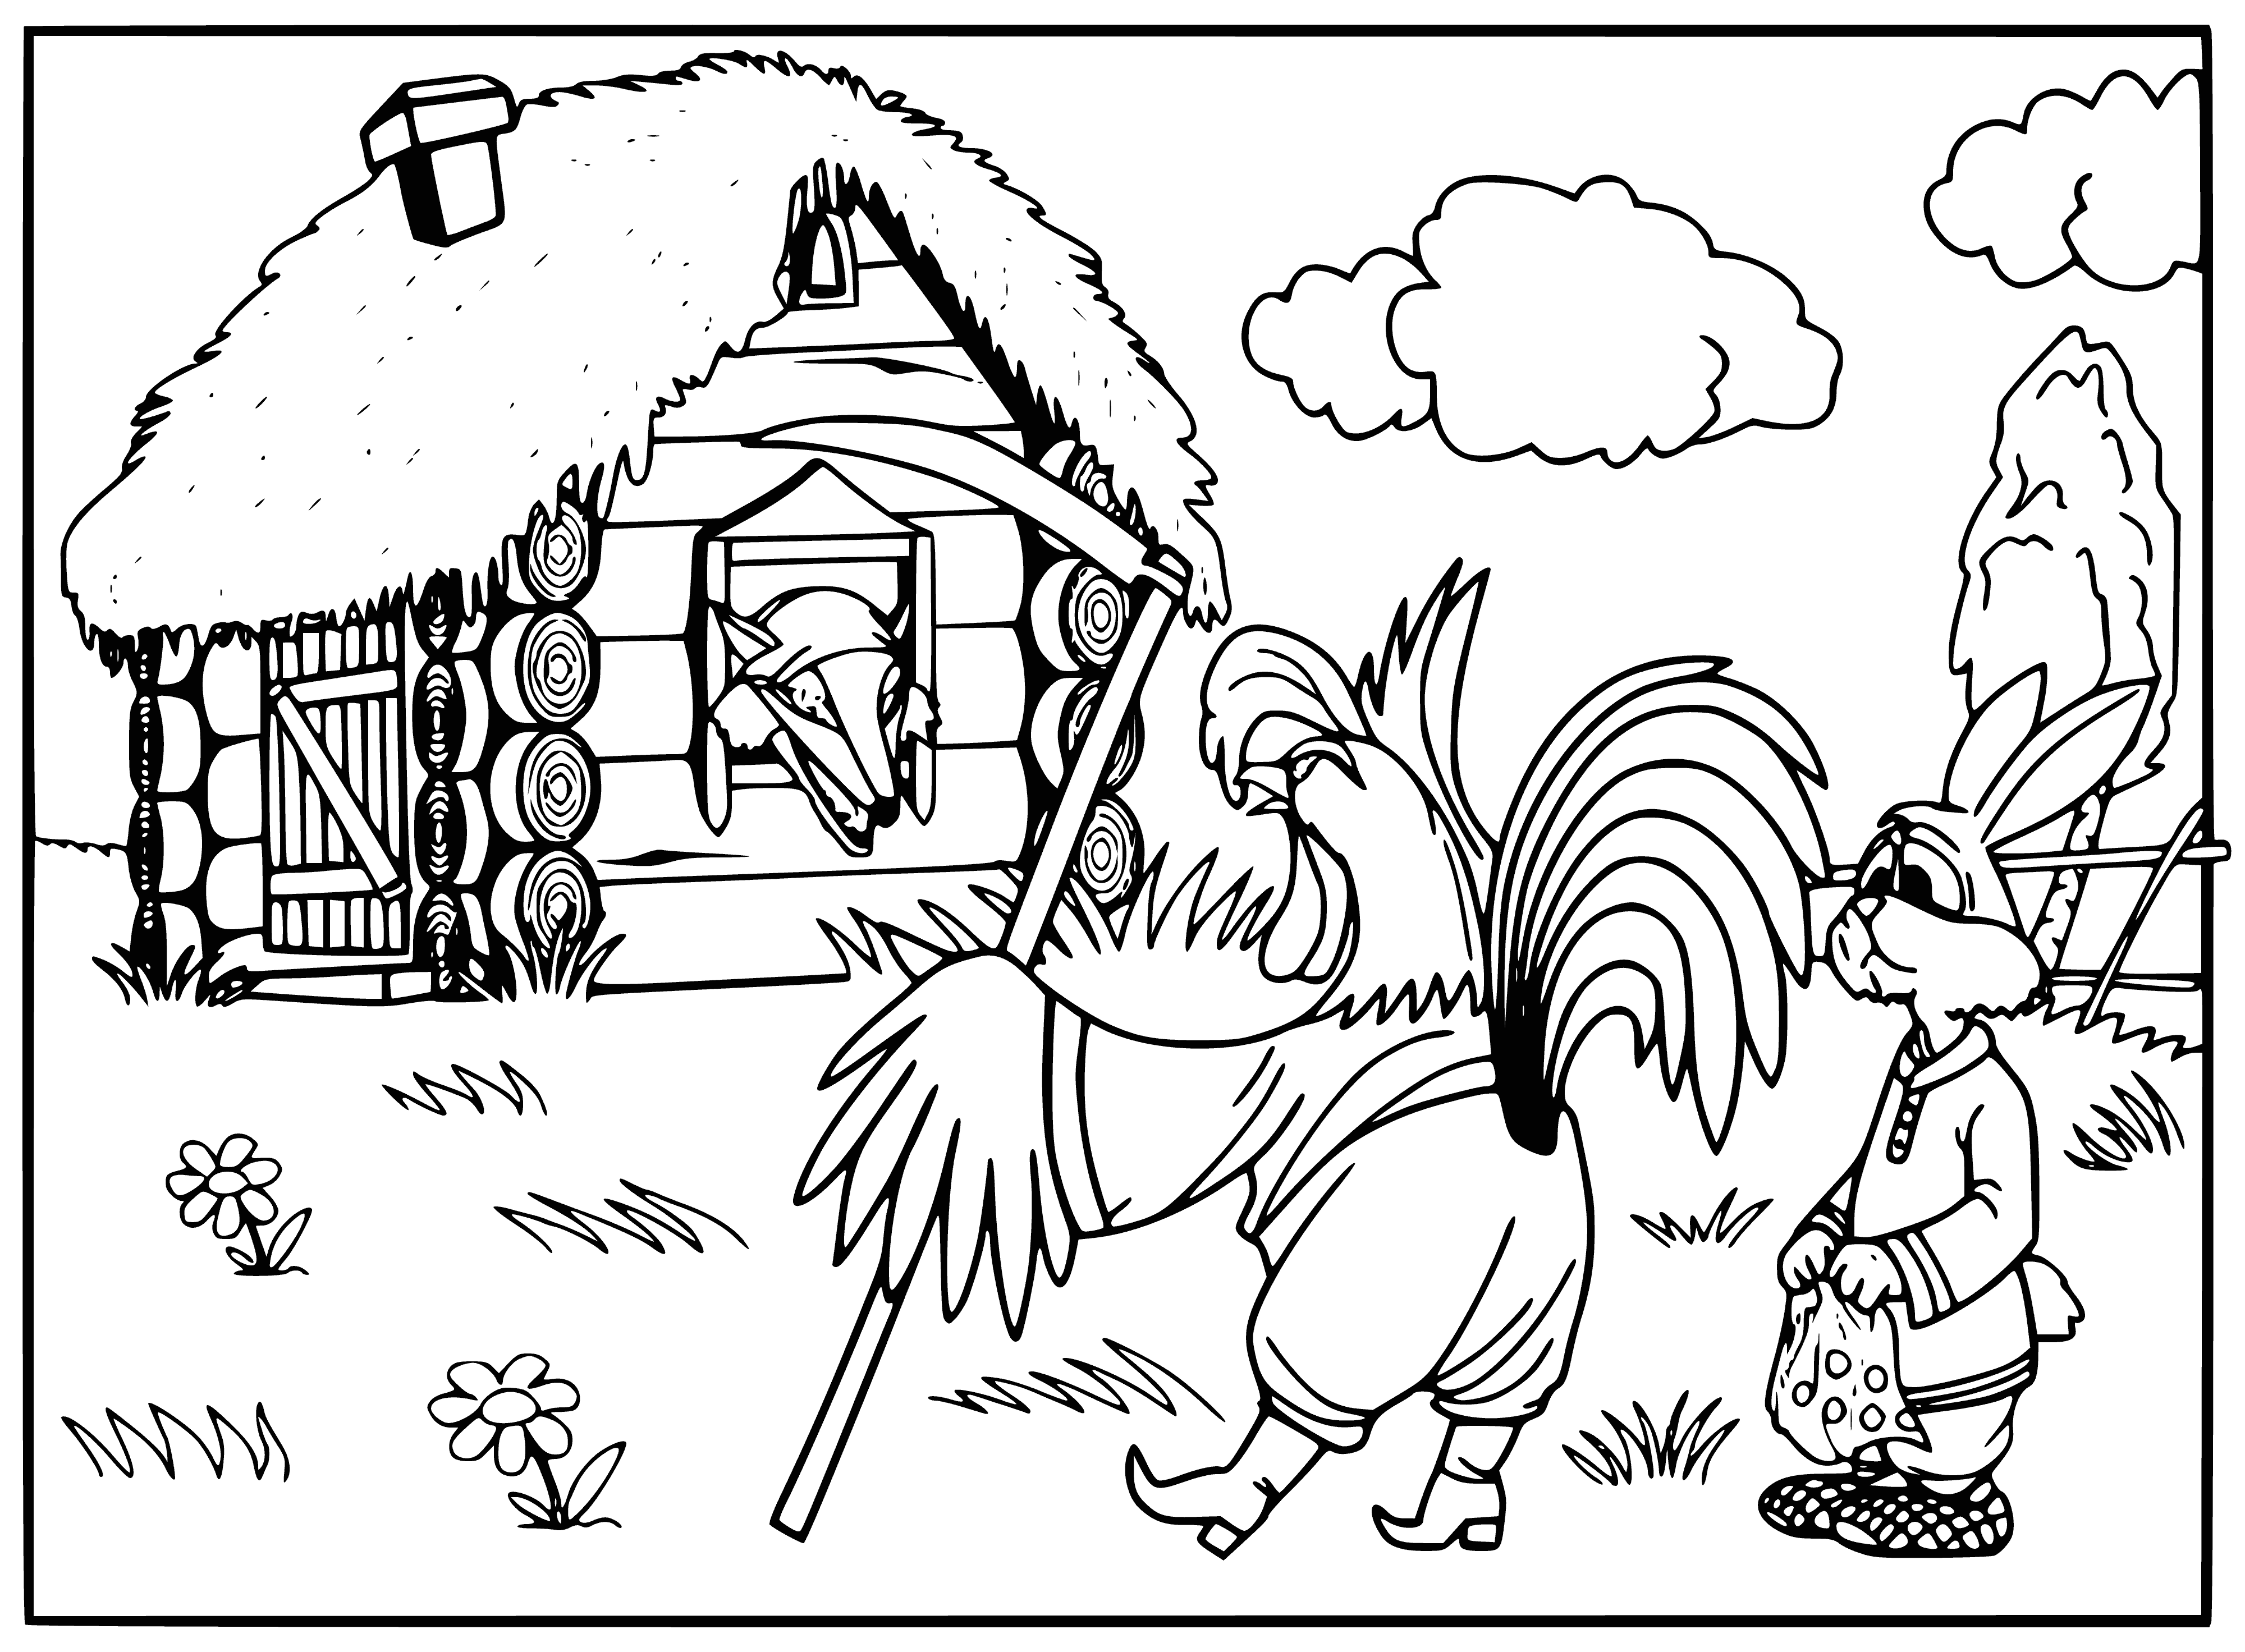 coloring page: Cock chases fox across a field, fox running away from the cock following close behind.